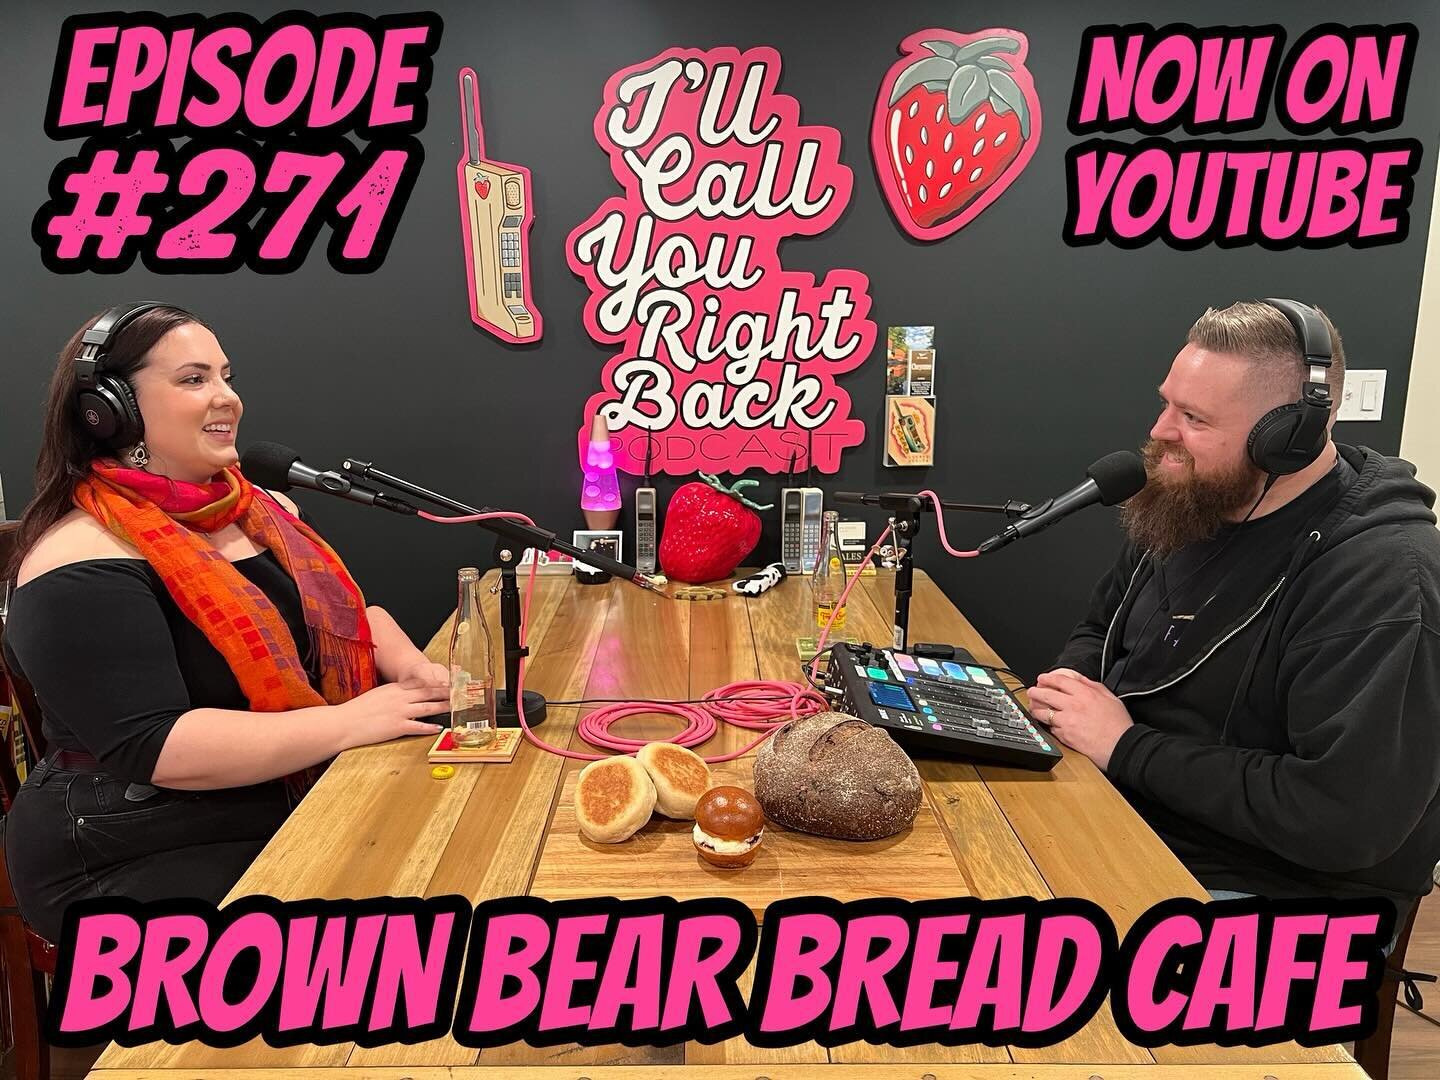 This week, we&rsquo;re in the studio with @brown.bear.bread.cafe co-owner Kate Clemons to talk all about bread, baking, and brunch! Actually, she talks about way more than just bread, baking, and brunch. Kate stops by and we dive into her previous li